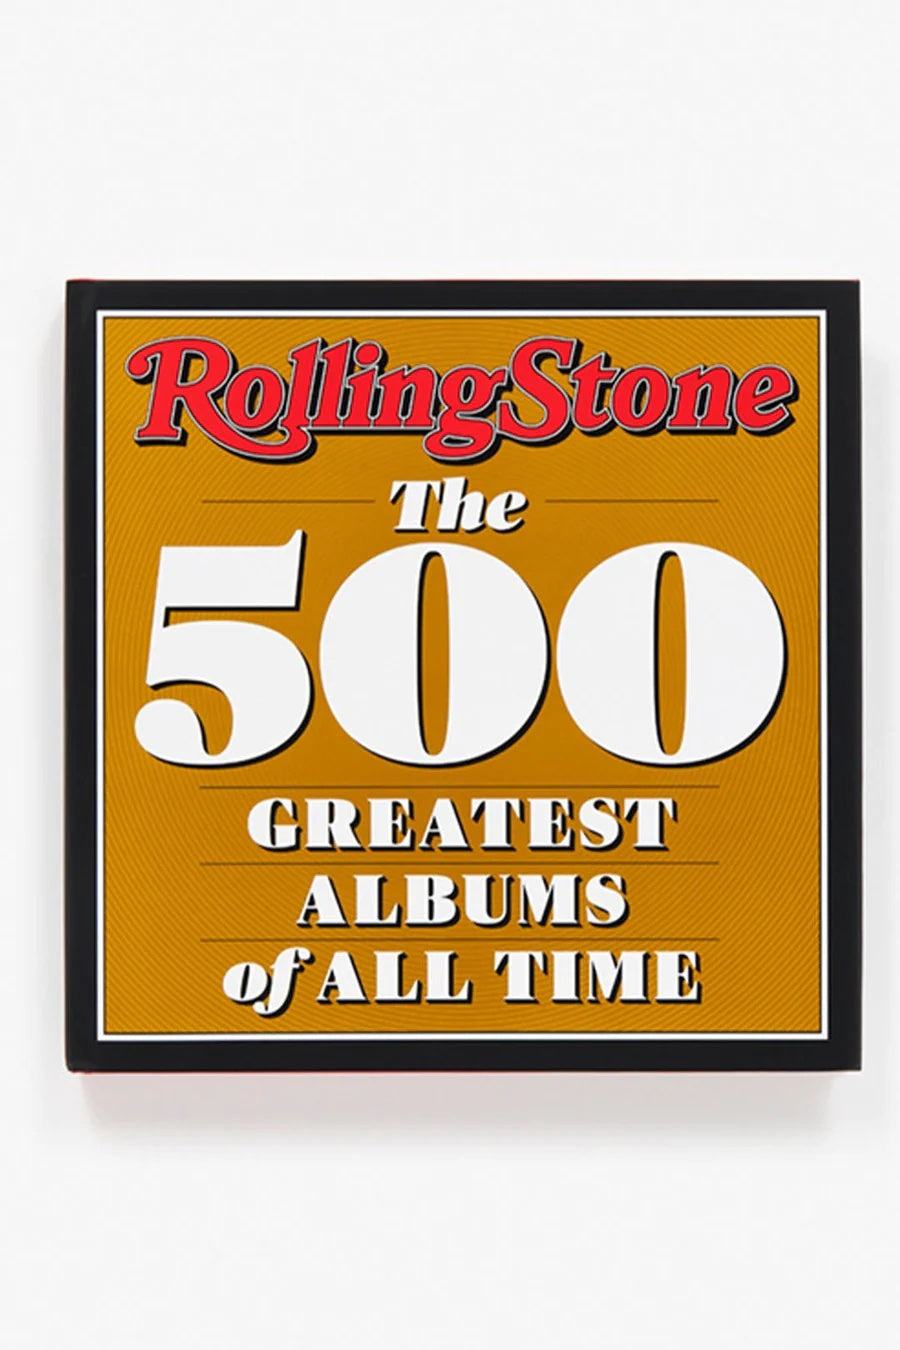 Rolling stone: The 500 Greatest Albums of All Time